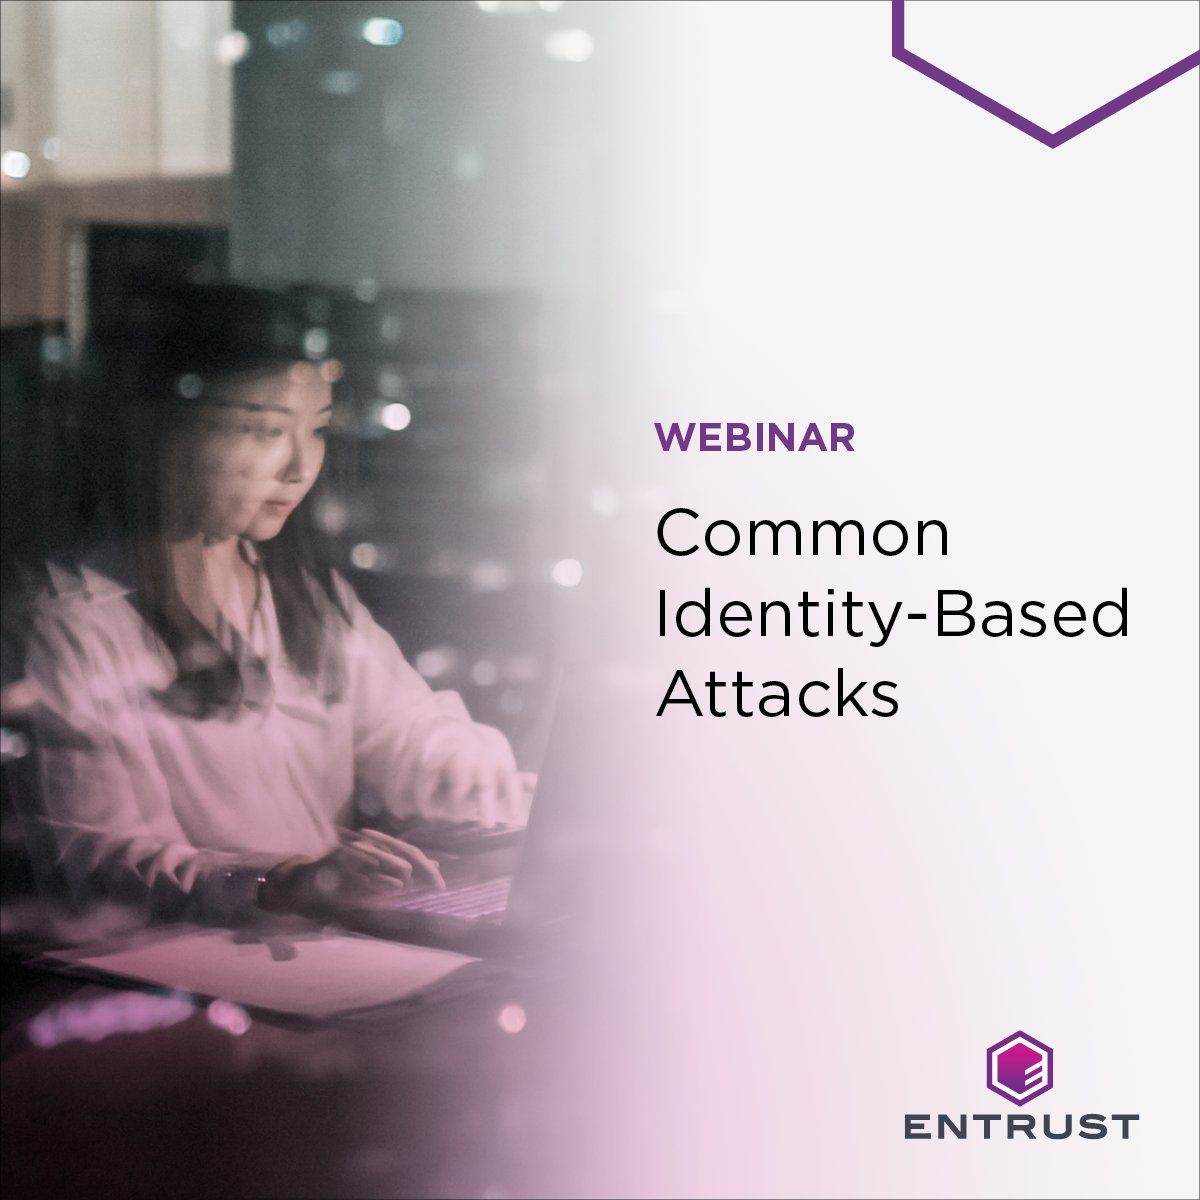 Join us on Tues, March 19, at 11:00 am ET for a webinar where we’ll discuss common identity-based cyberattacks and explore ways to defend against them. bit.ly/3TyxRSG #DiscoverEntrust #cybersecurity